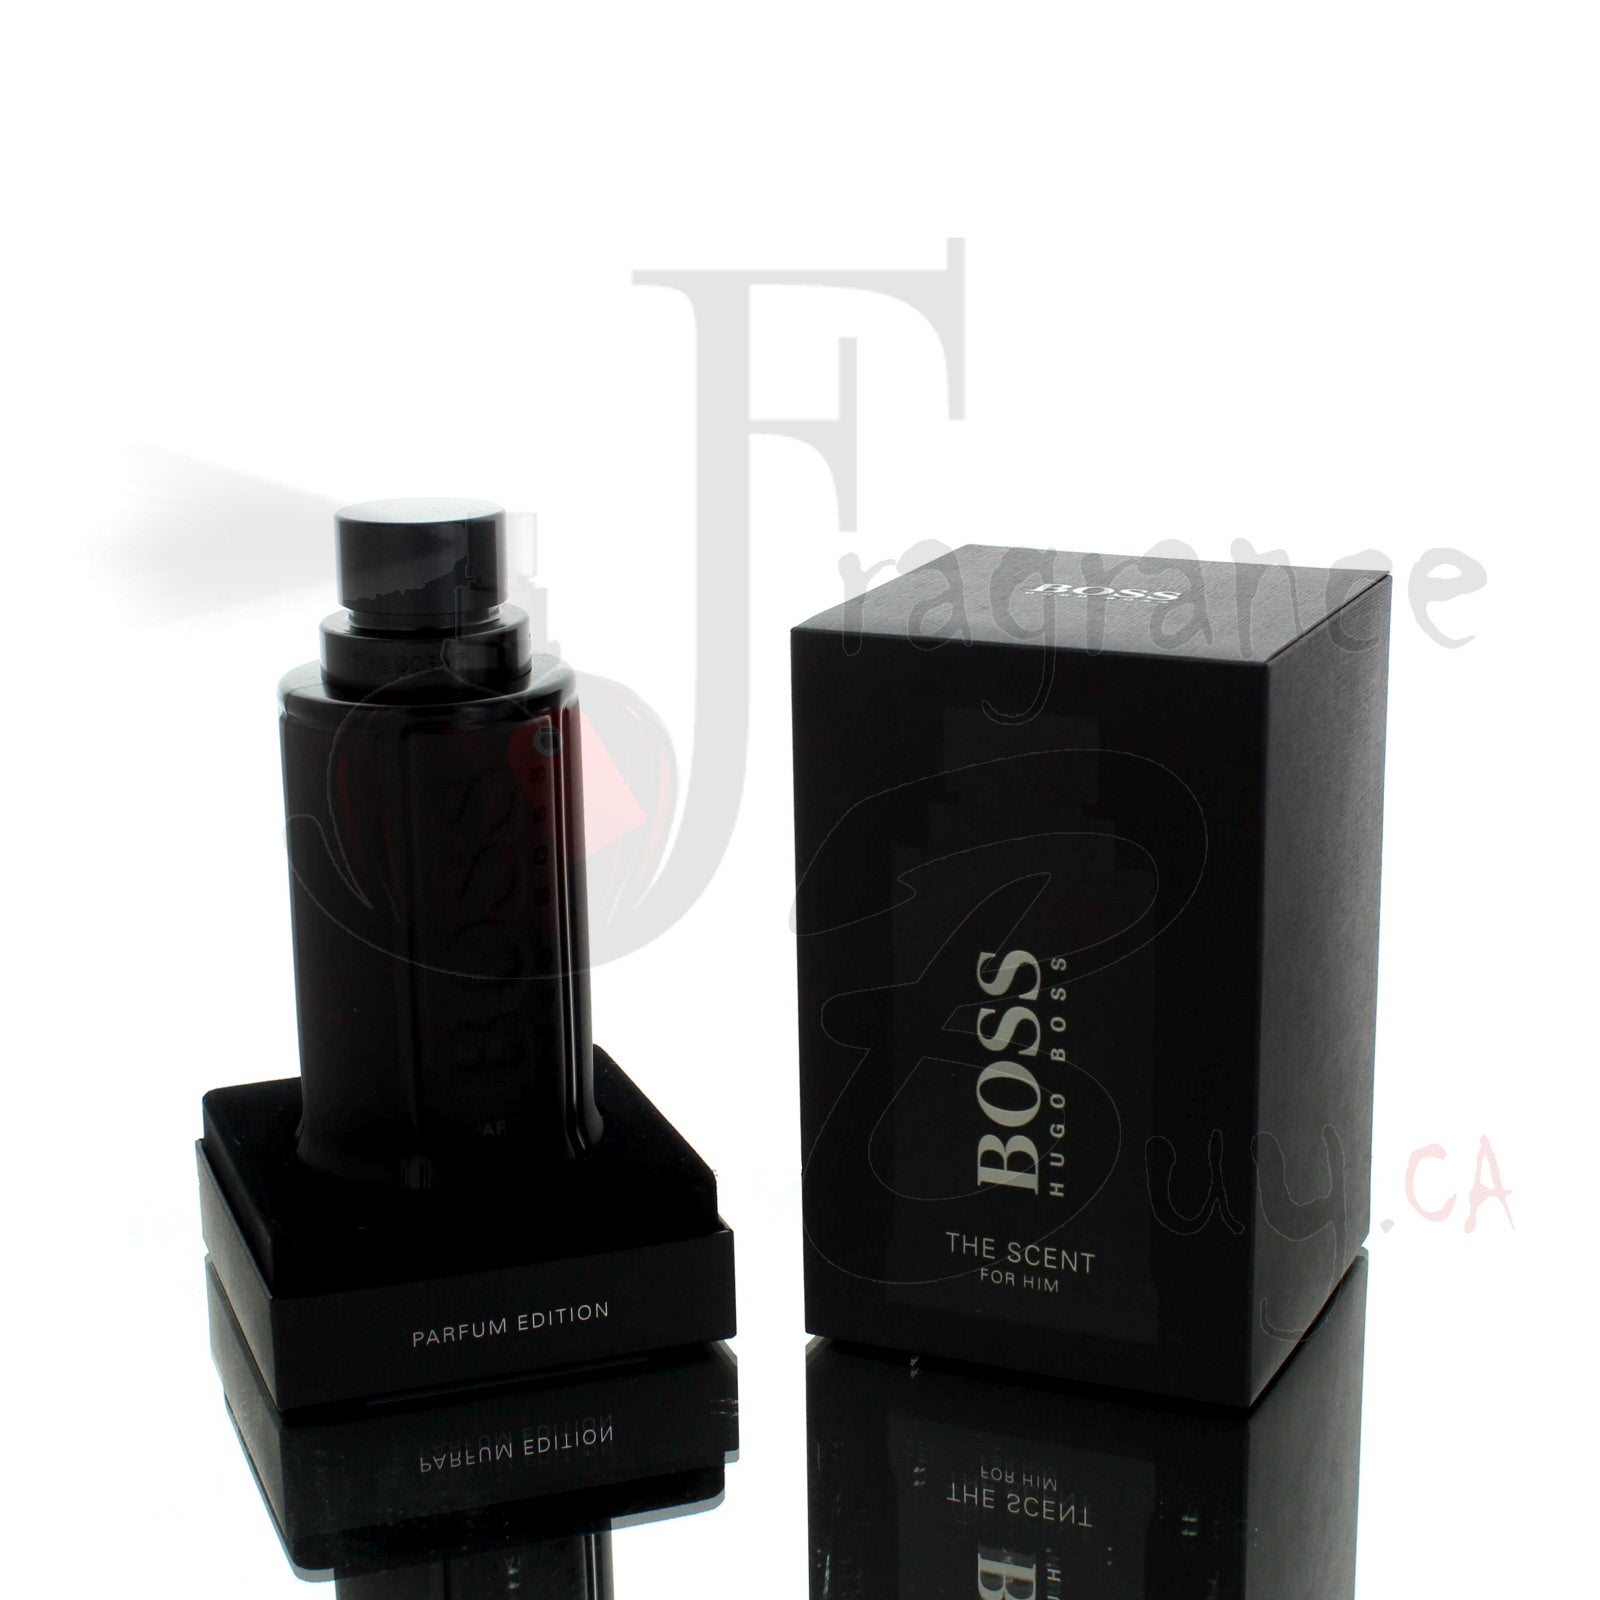 hugo boss the scent parfum edition for him